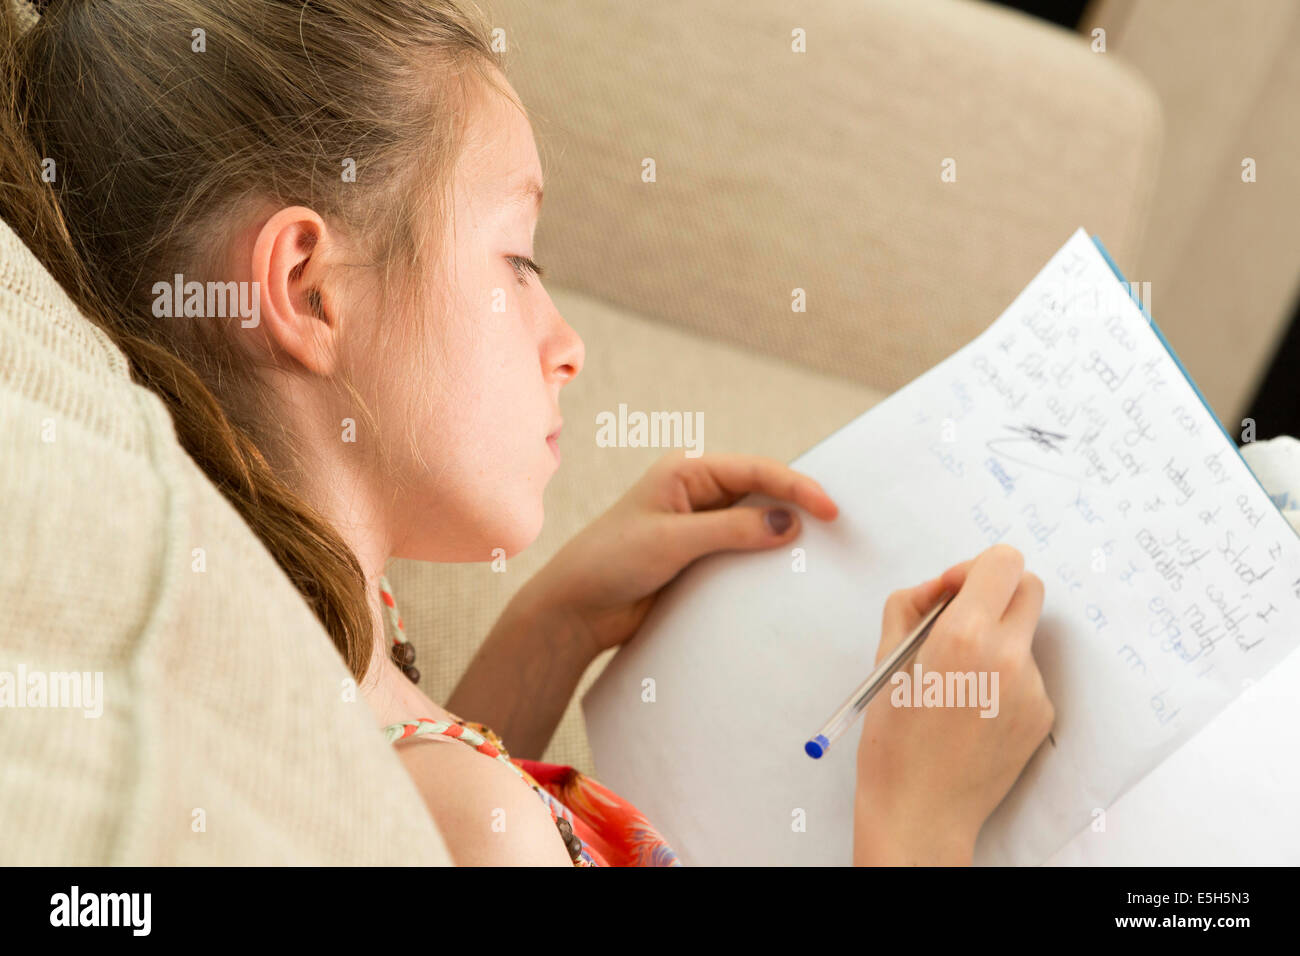 young girl writing essay / doing homework / in diary Stock Photo